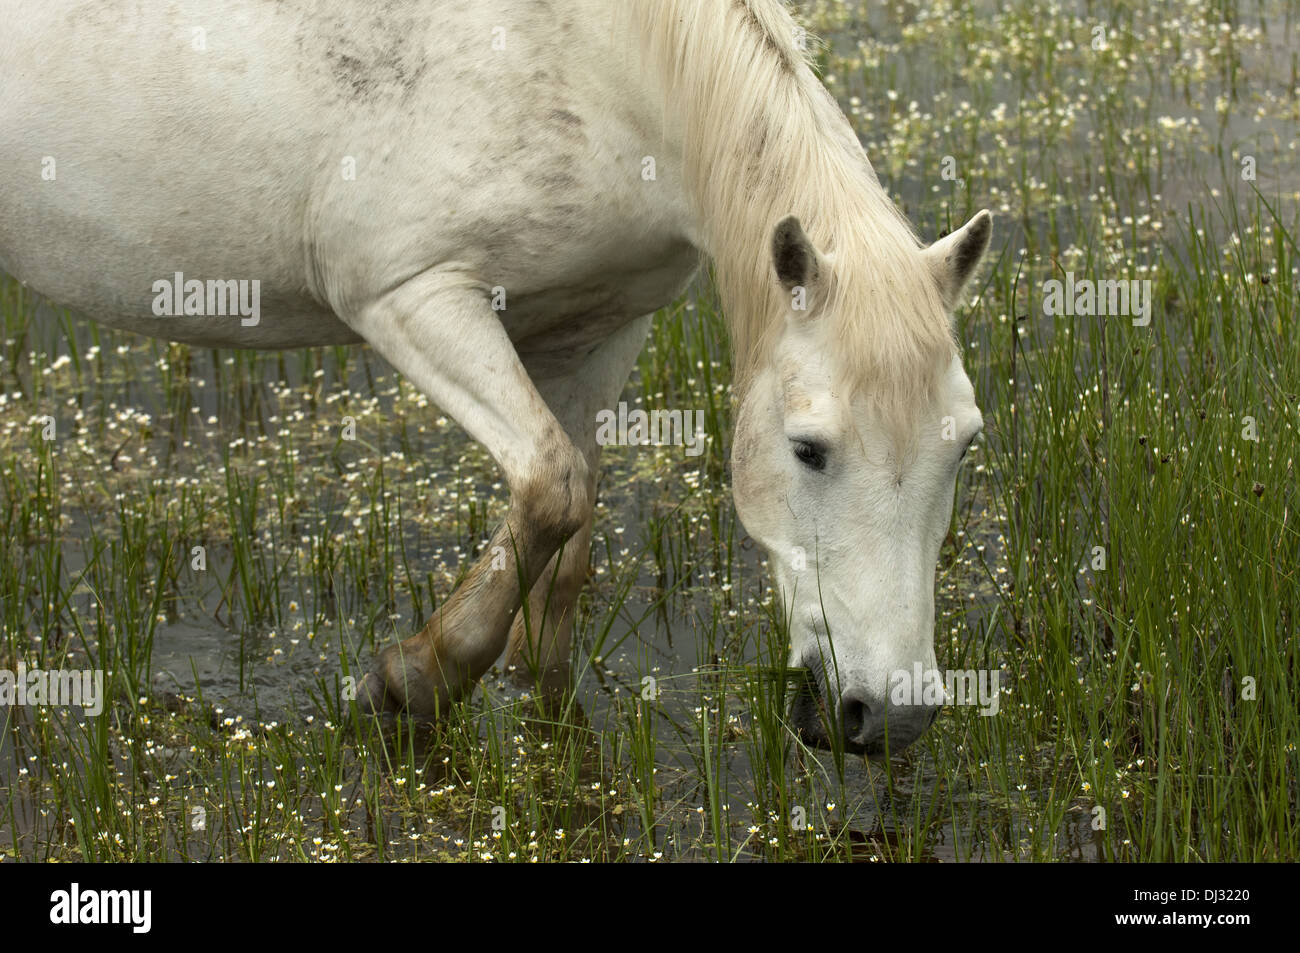 Camargue horse foraging in a wetland Stock Photo